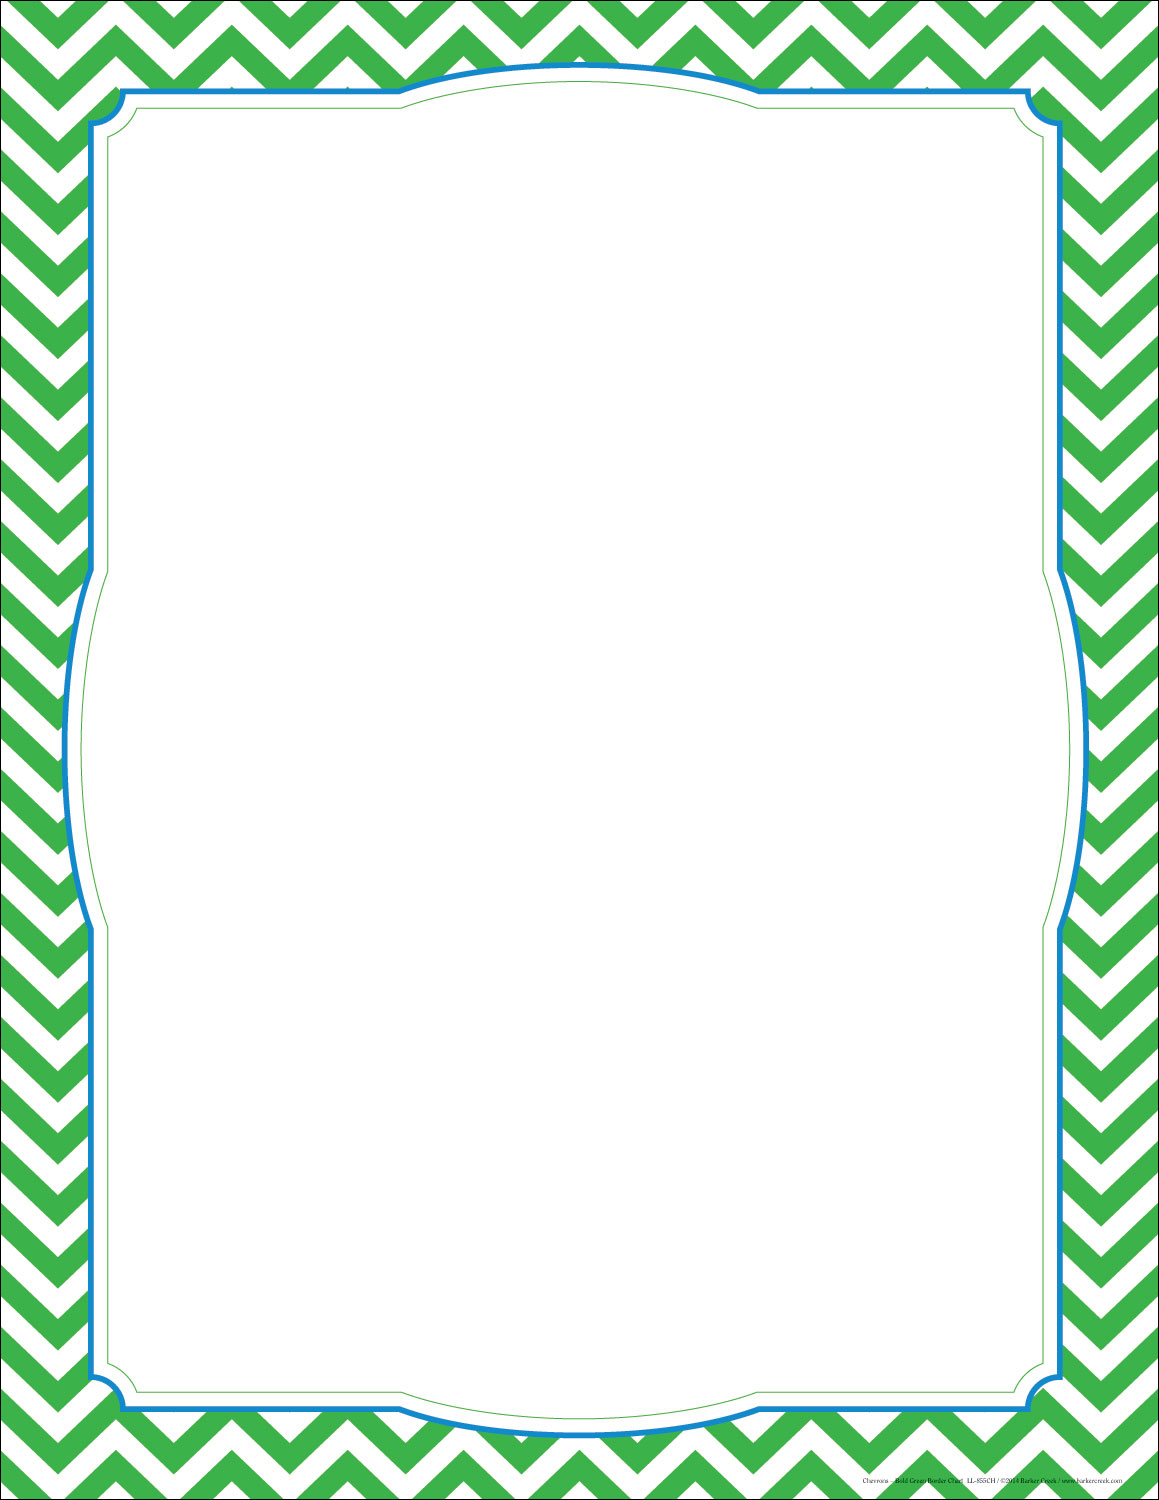 Gray Chevron Border Clip Art Page And Vector Graphics Pictures